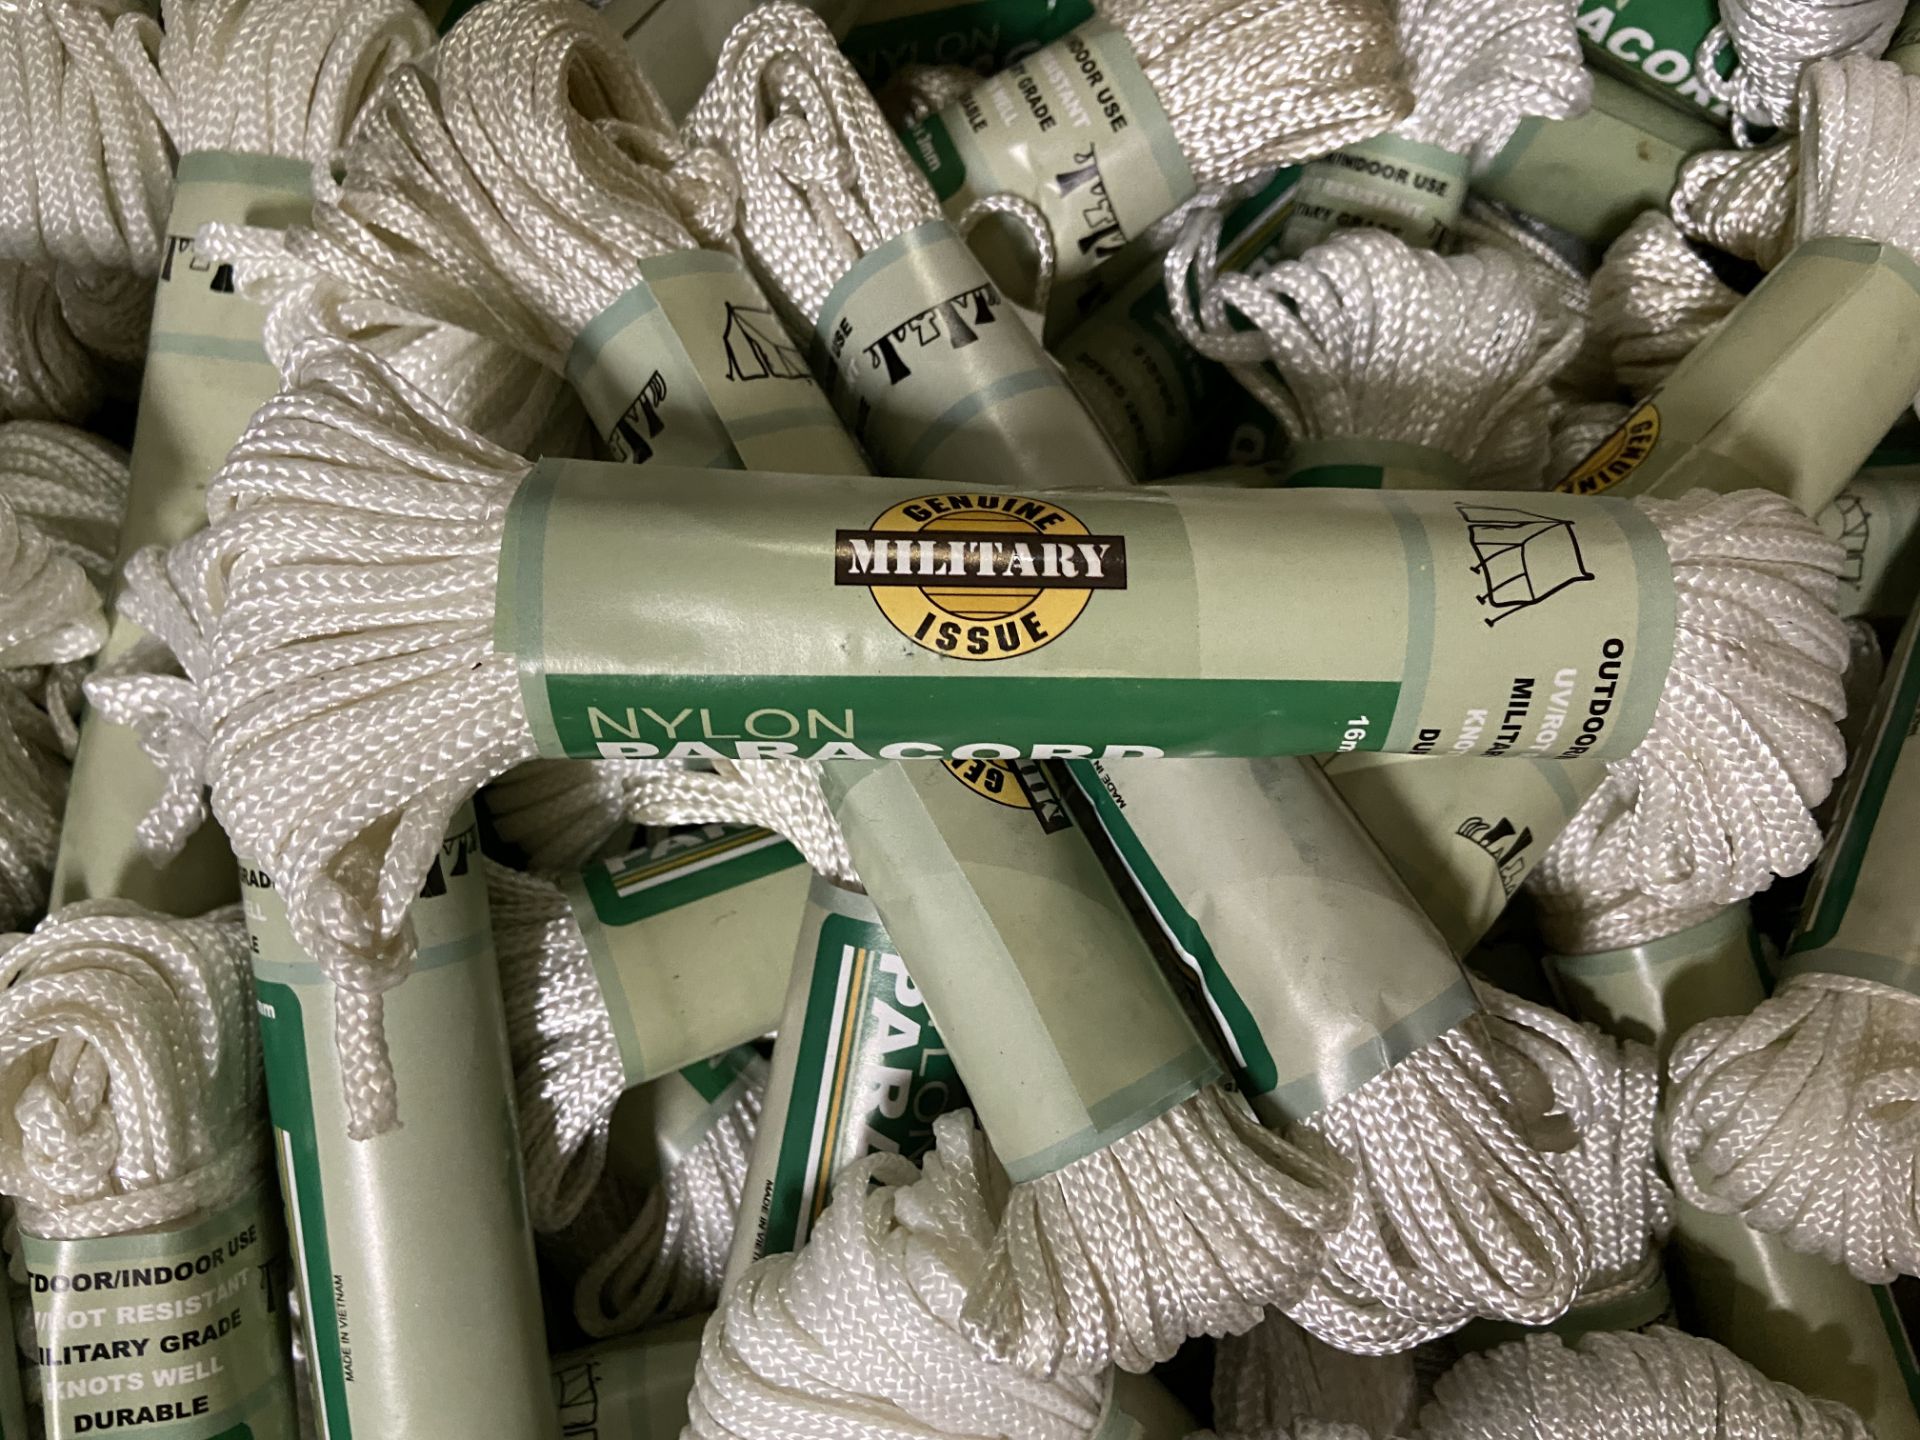 20,000+ units of Nylon Utility Rope Paracord Cord for indoor/outdoor use, Retail Value $33k+ - Image 8 of 9